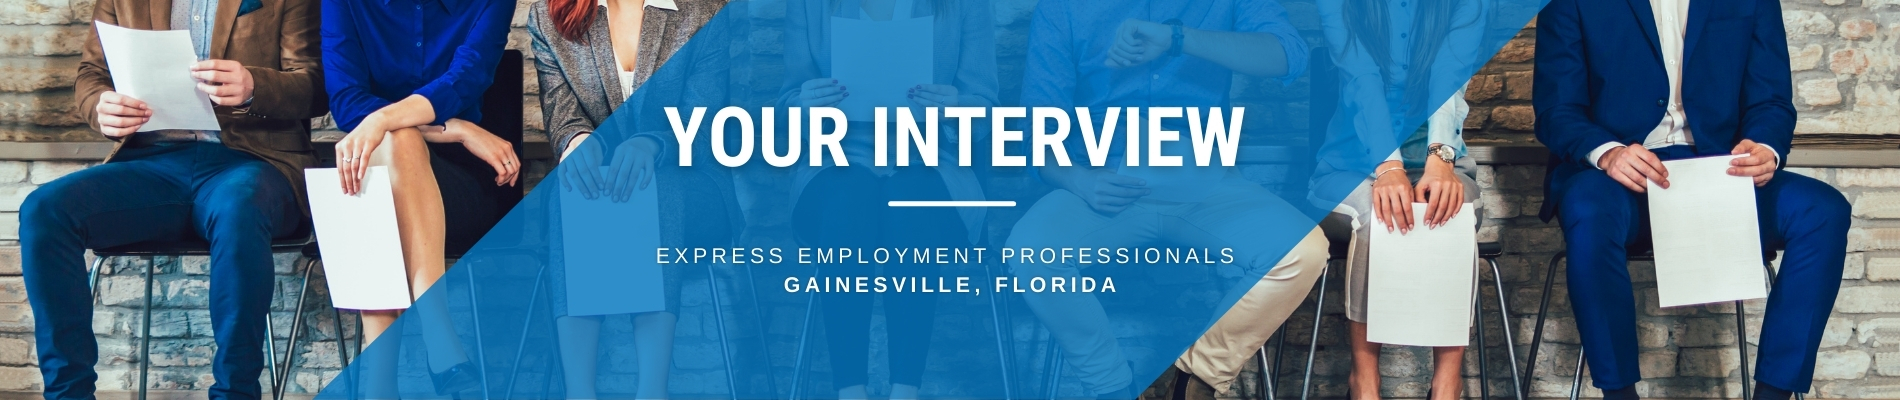 What to Bring to Your Job Interview at Express Gainesville, FL